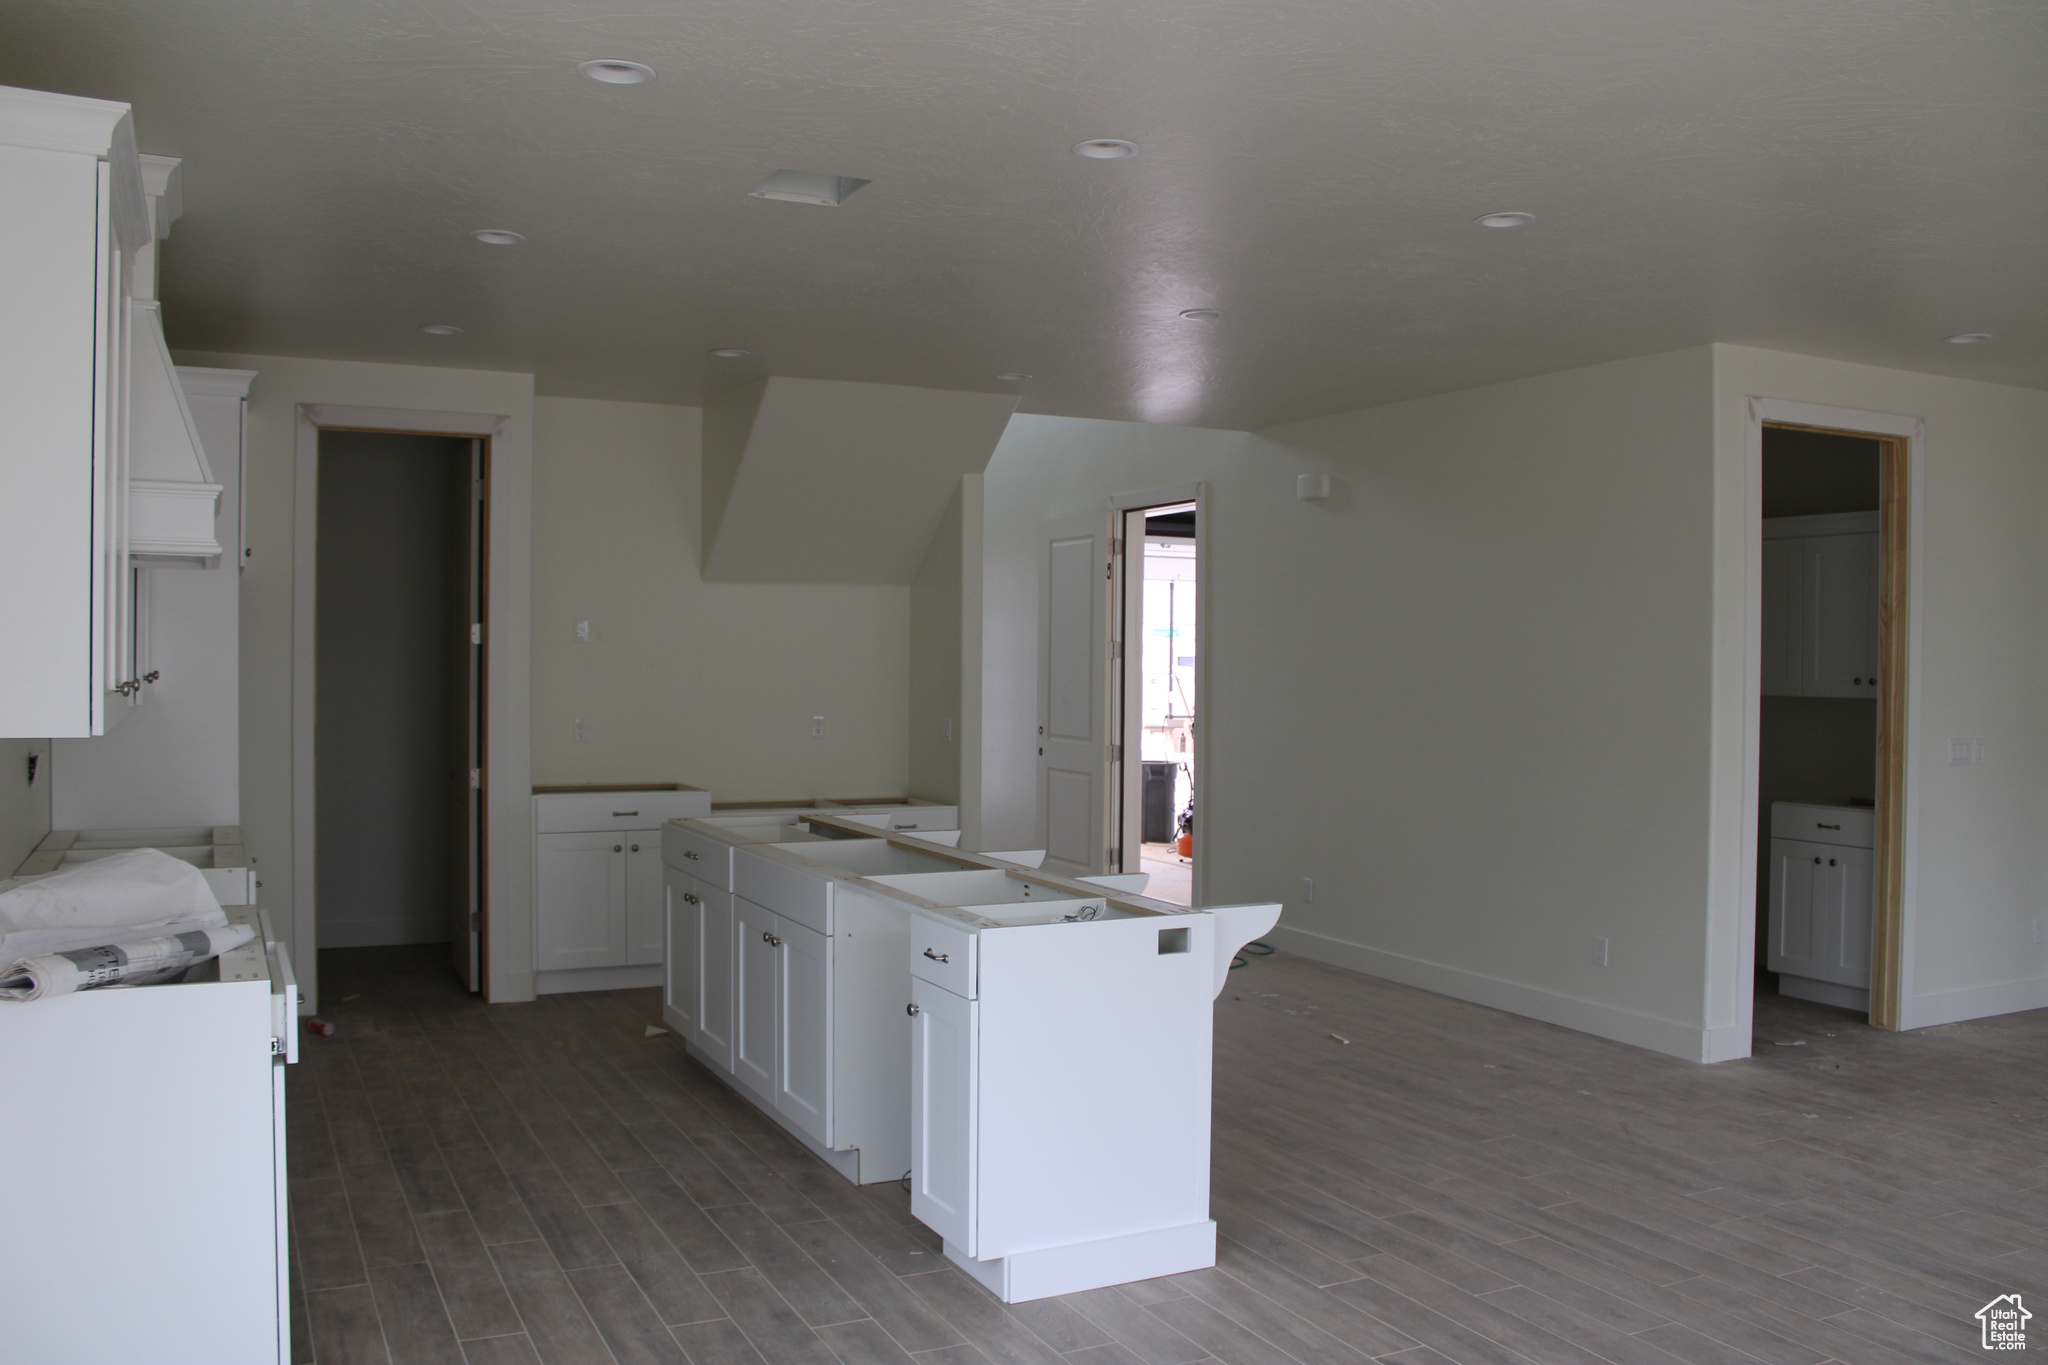 Kitchen will Have Granite Counter Tops & LG Appliances (Includes the Fridge)